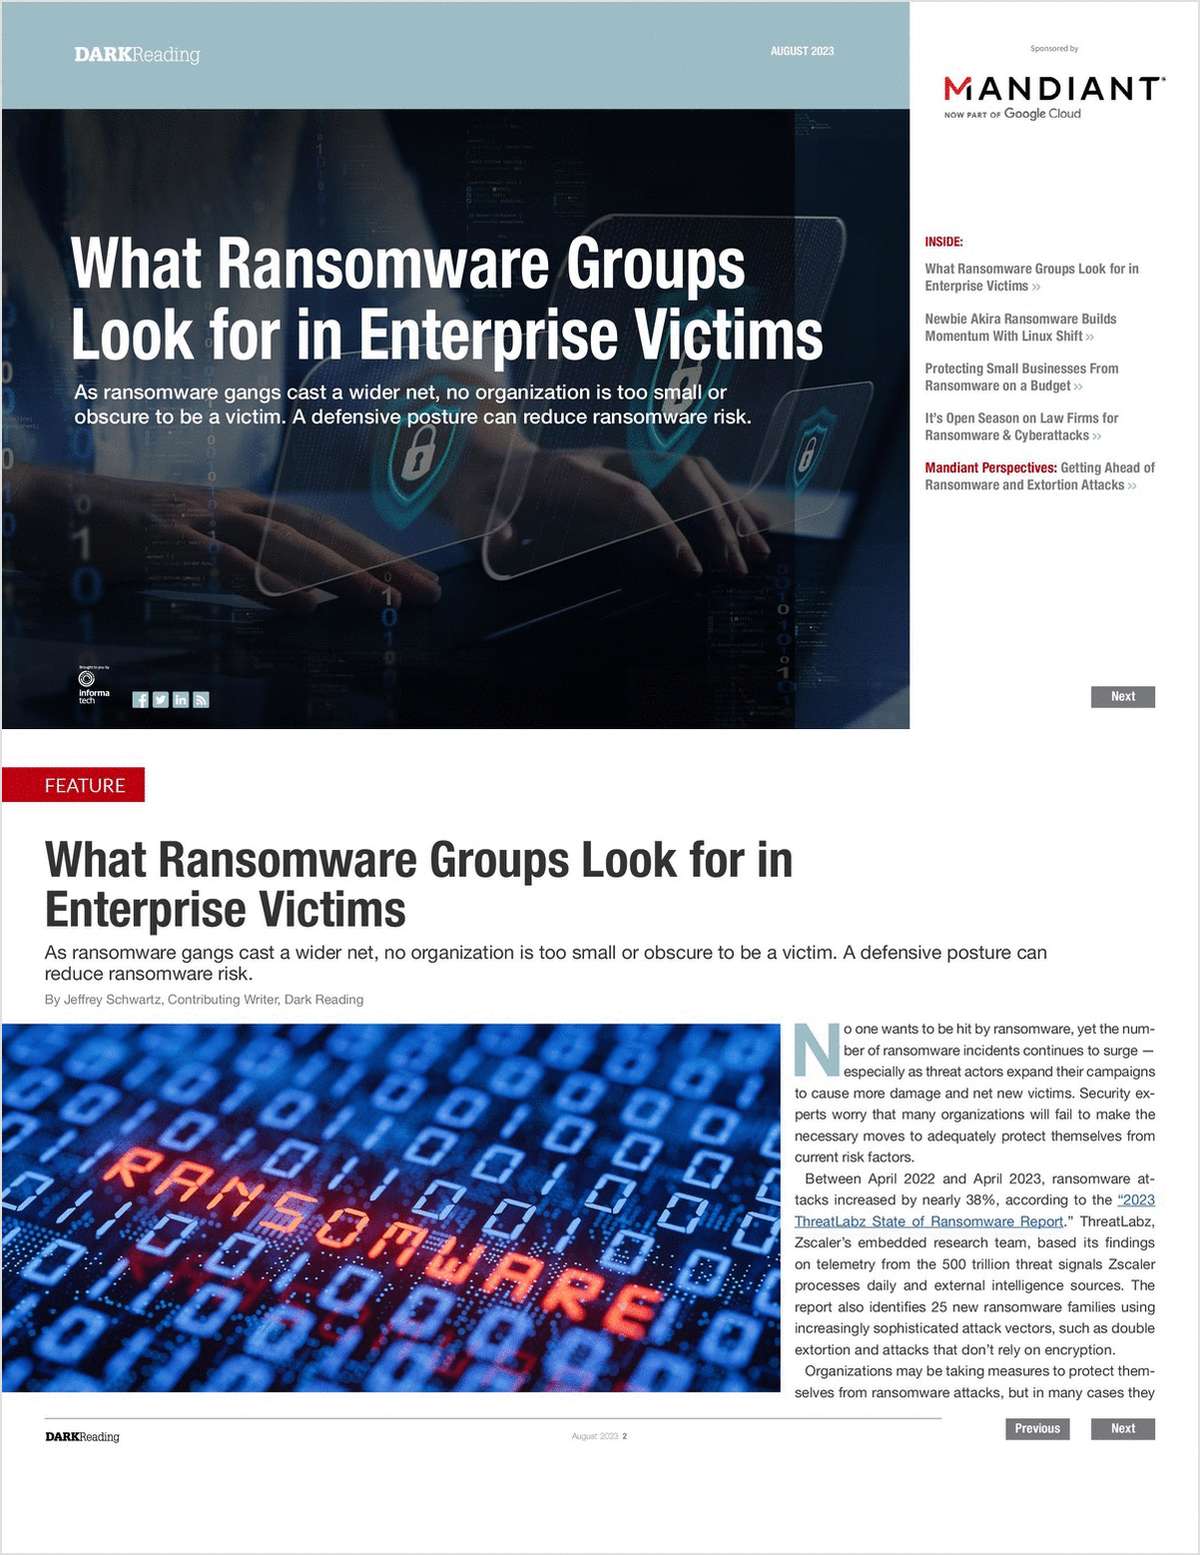 What Ransomware Groups Look for in Enterprise Victims